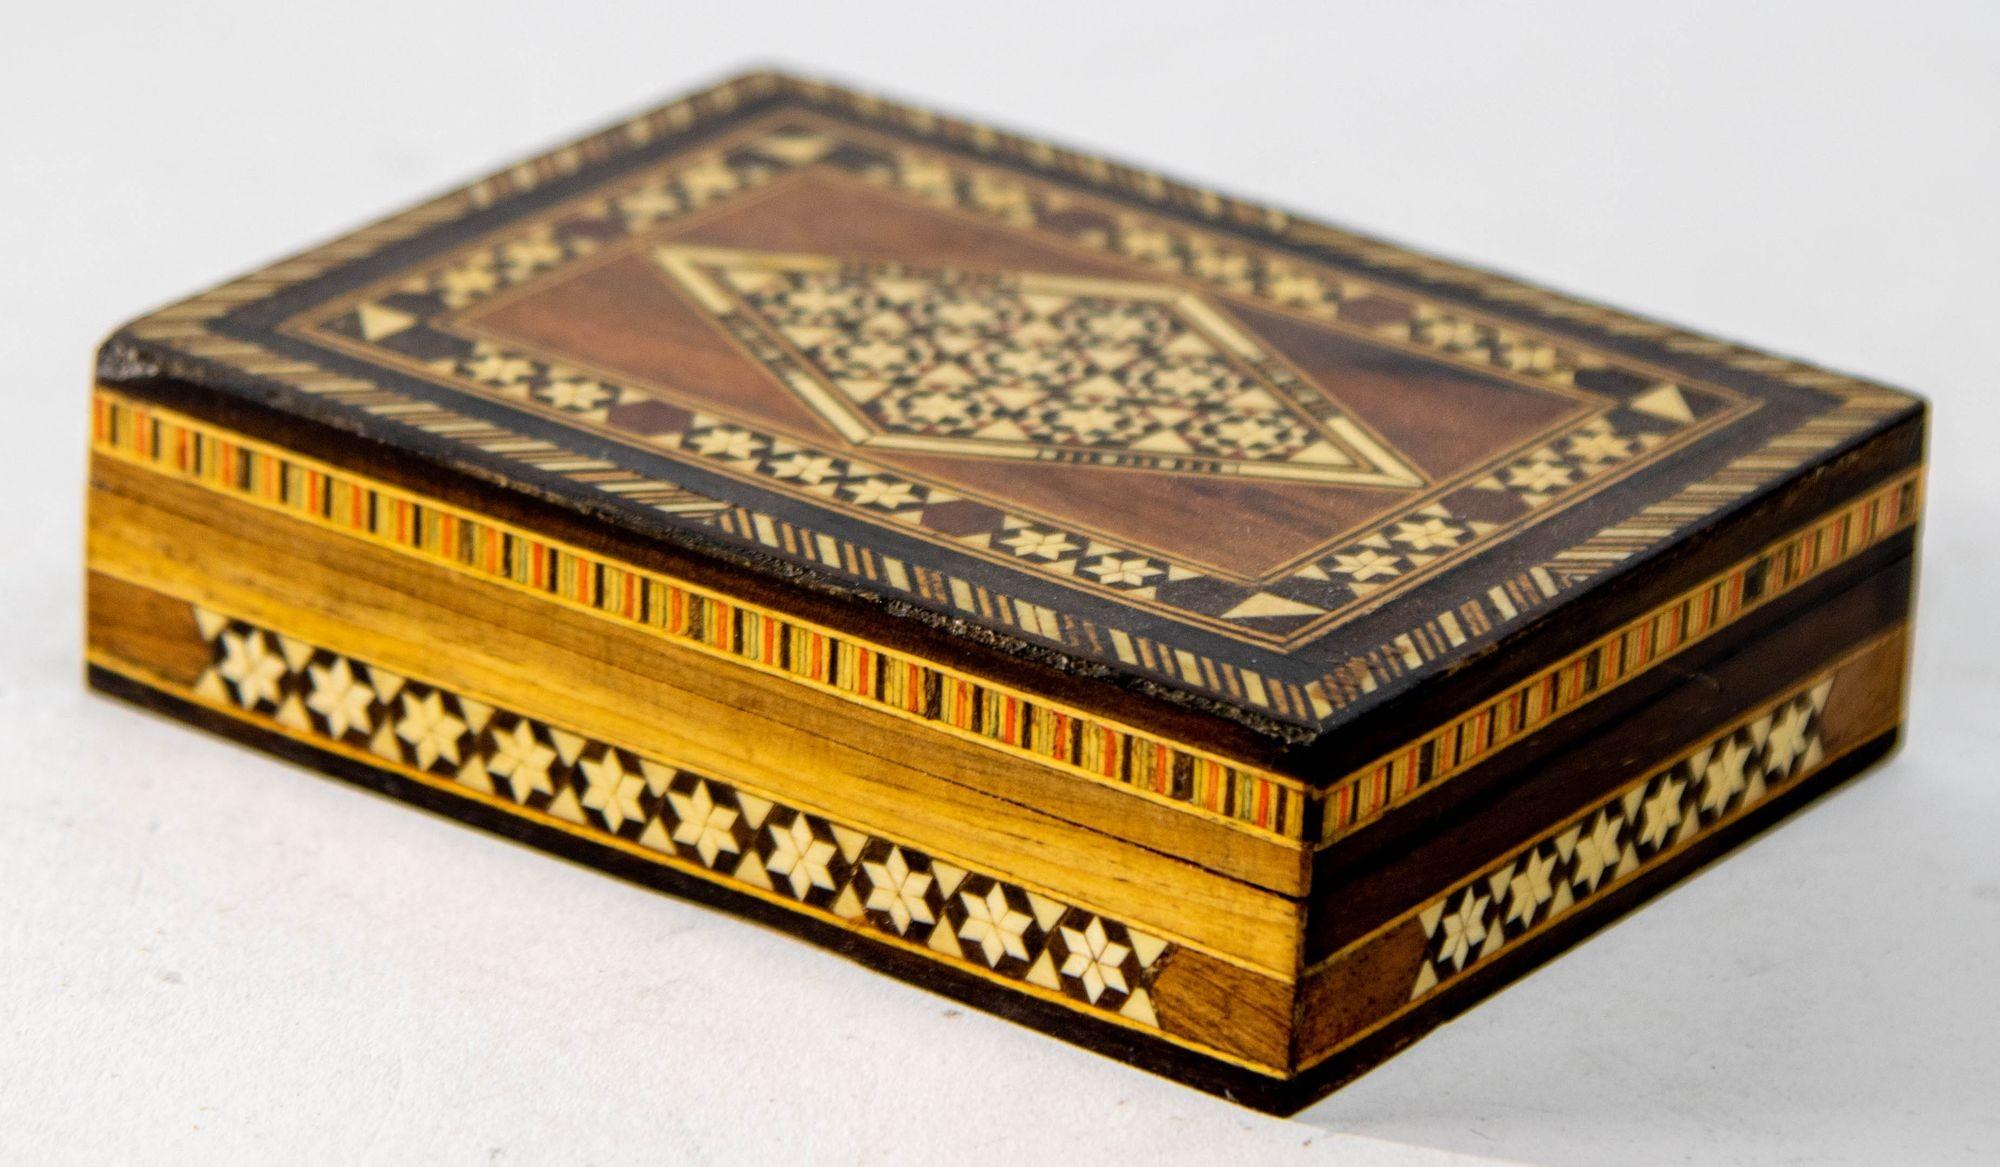 1940s Marquetry Mosaic Wood Inlay Box Moorish Spain.
Exquisite hand-crafted Khatam wood box with micro mosaic marquetry design.
Middle Eastern style handcrafted box in very fine Moorish micro mosaic diamonds, and a continuous geometrical Moorish